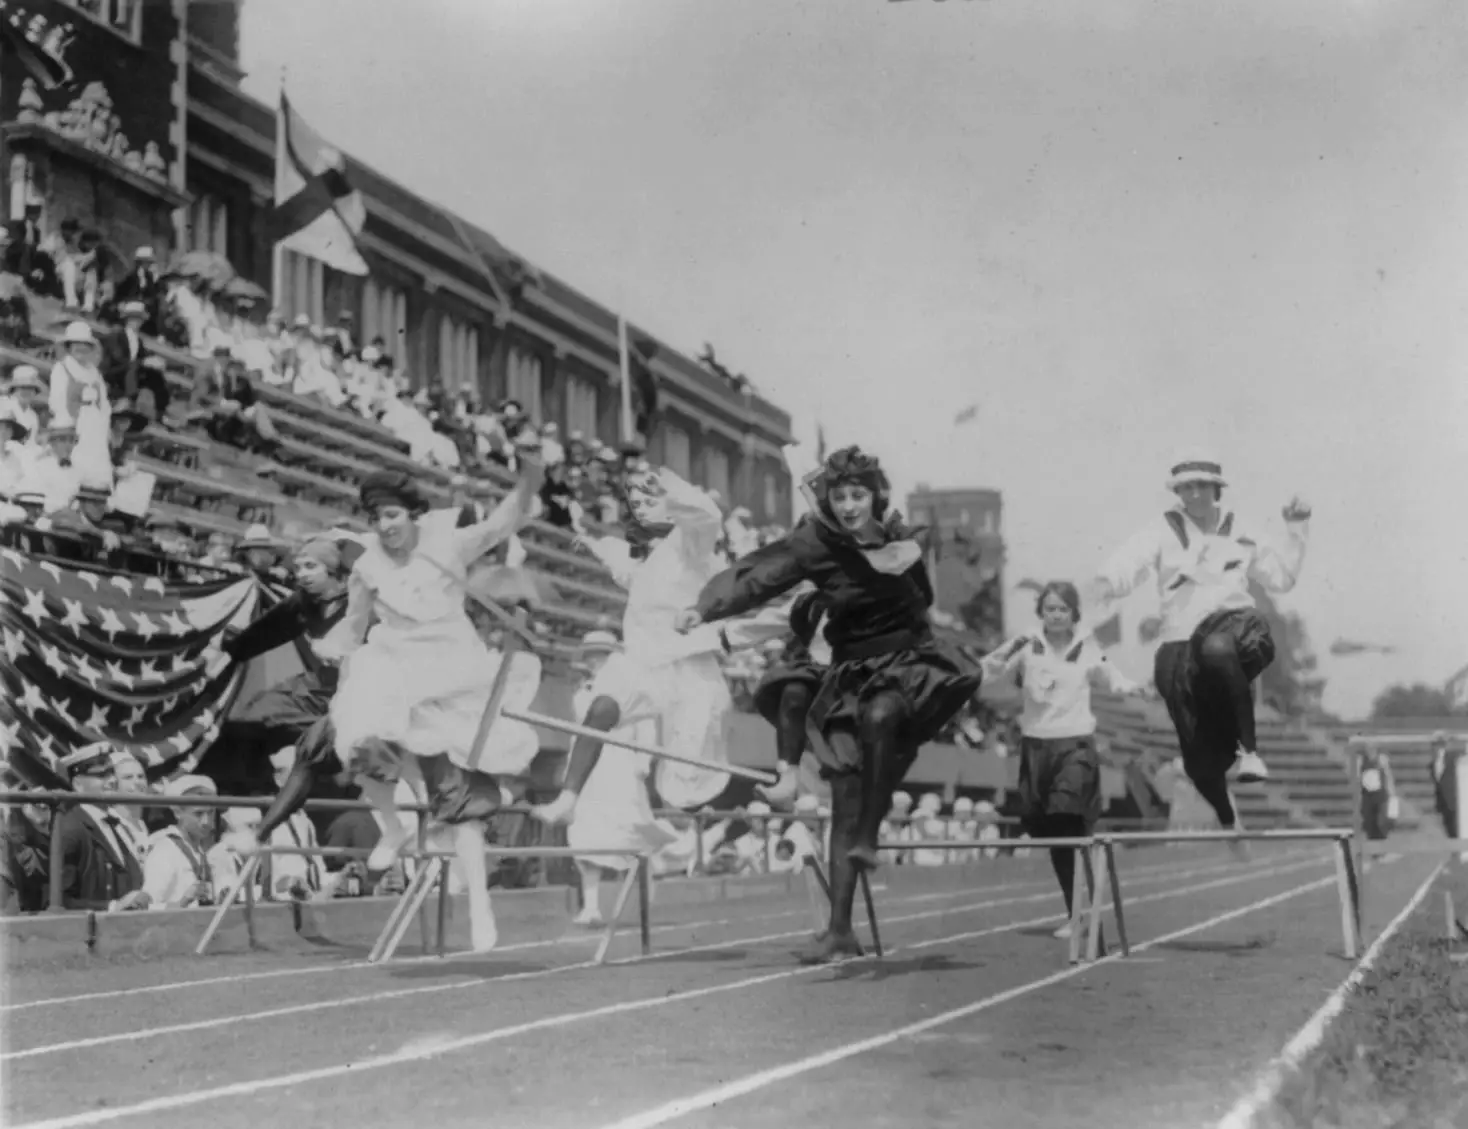 Women competing in low hurdle race